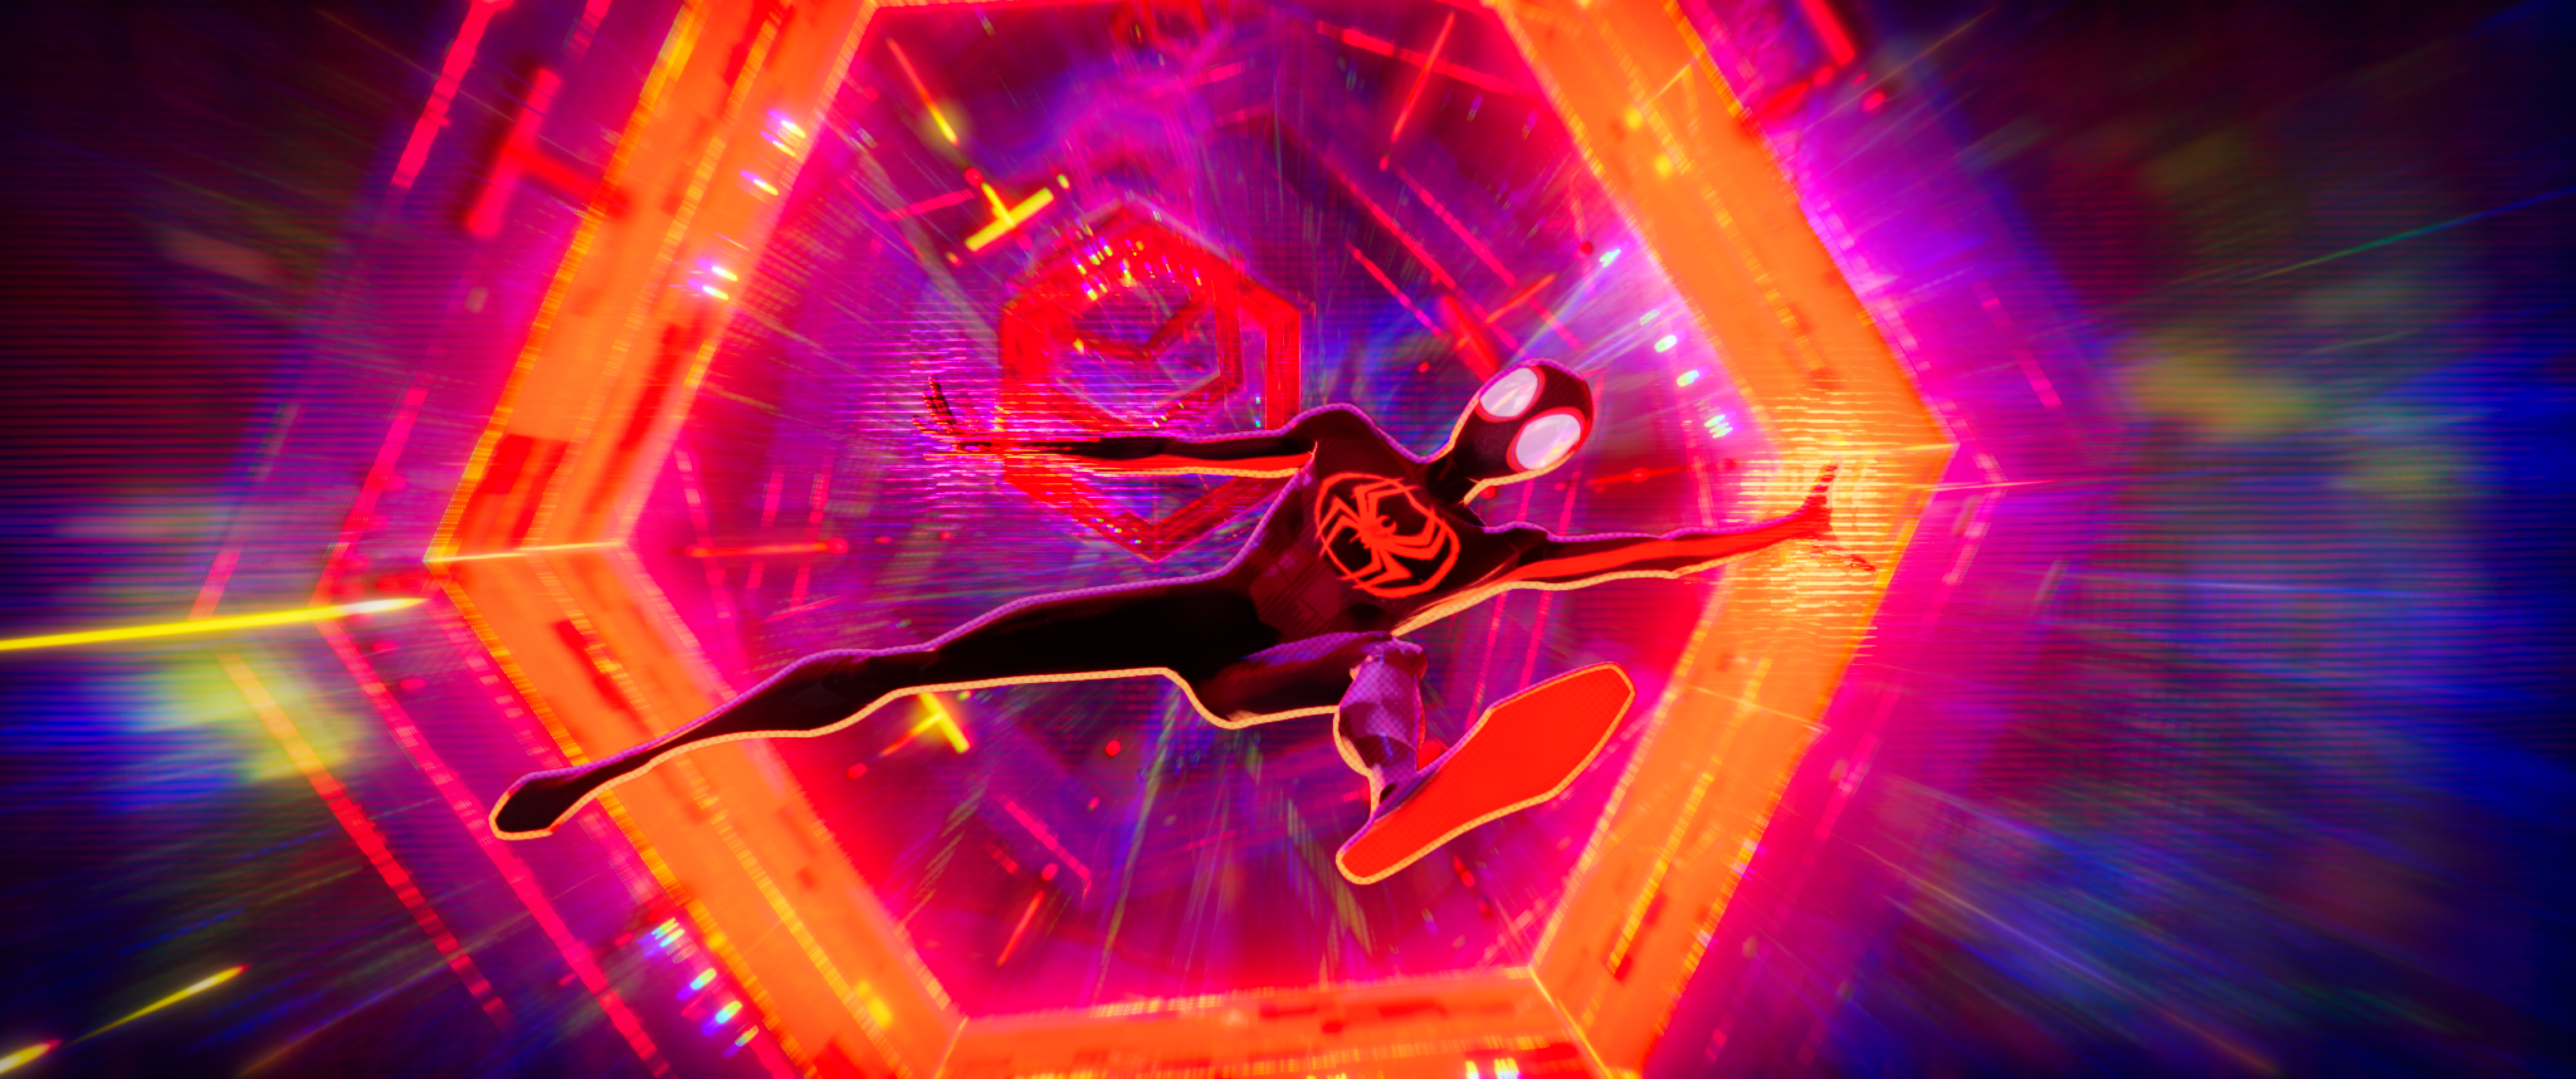 Spider-Man: Across the Spider-Verse Gets New Images, Trailer